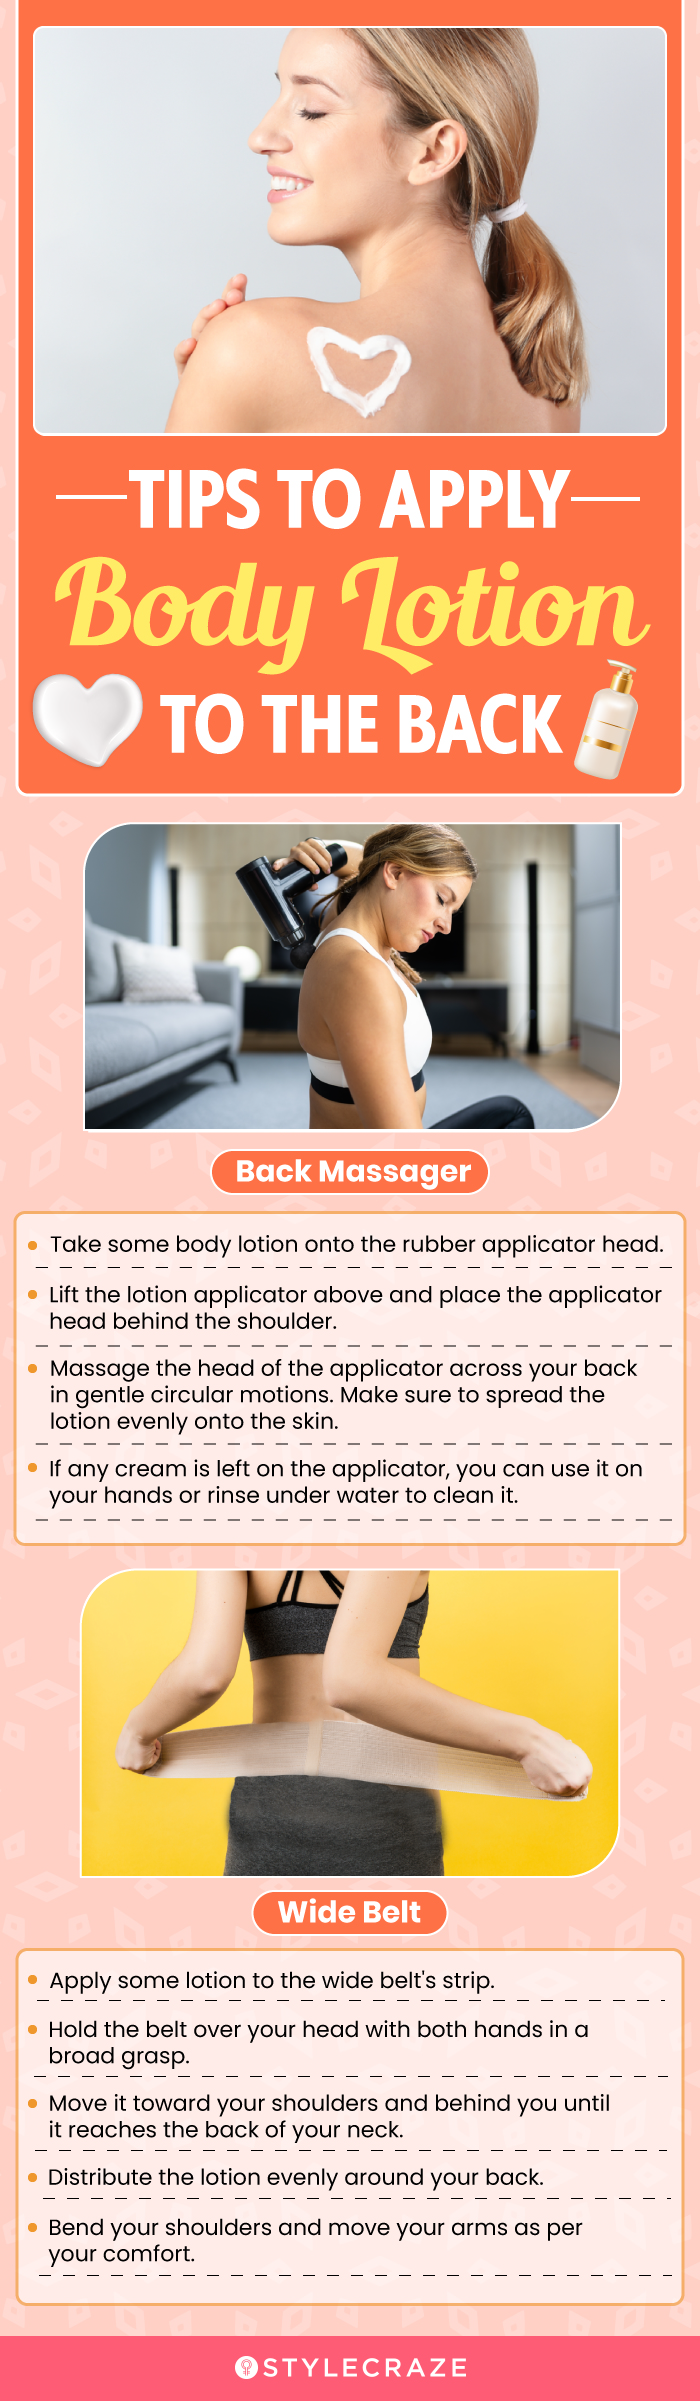 Tips To Apply Body Lotion At The Back (infographic)